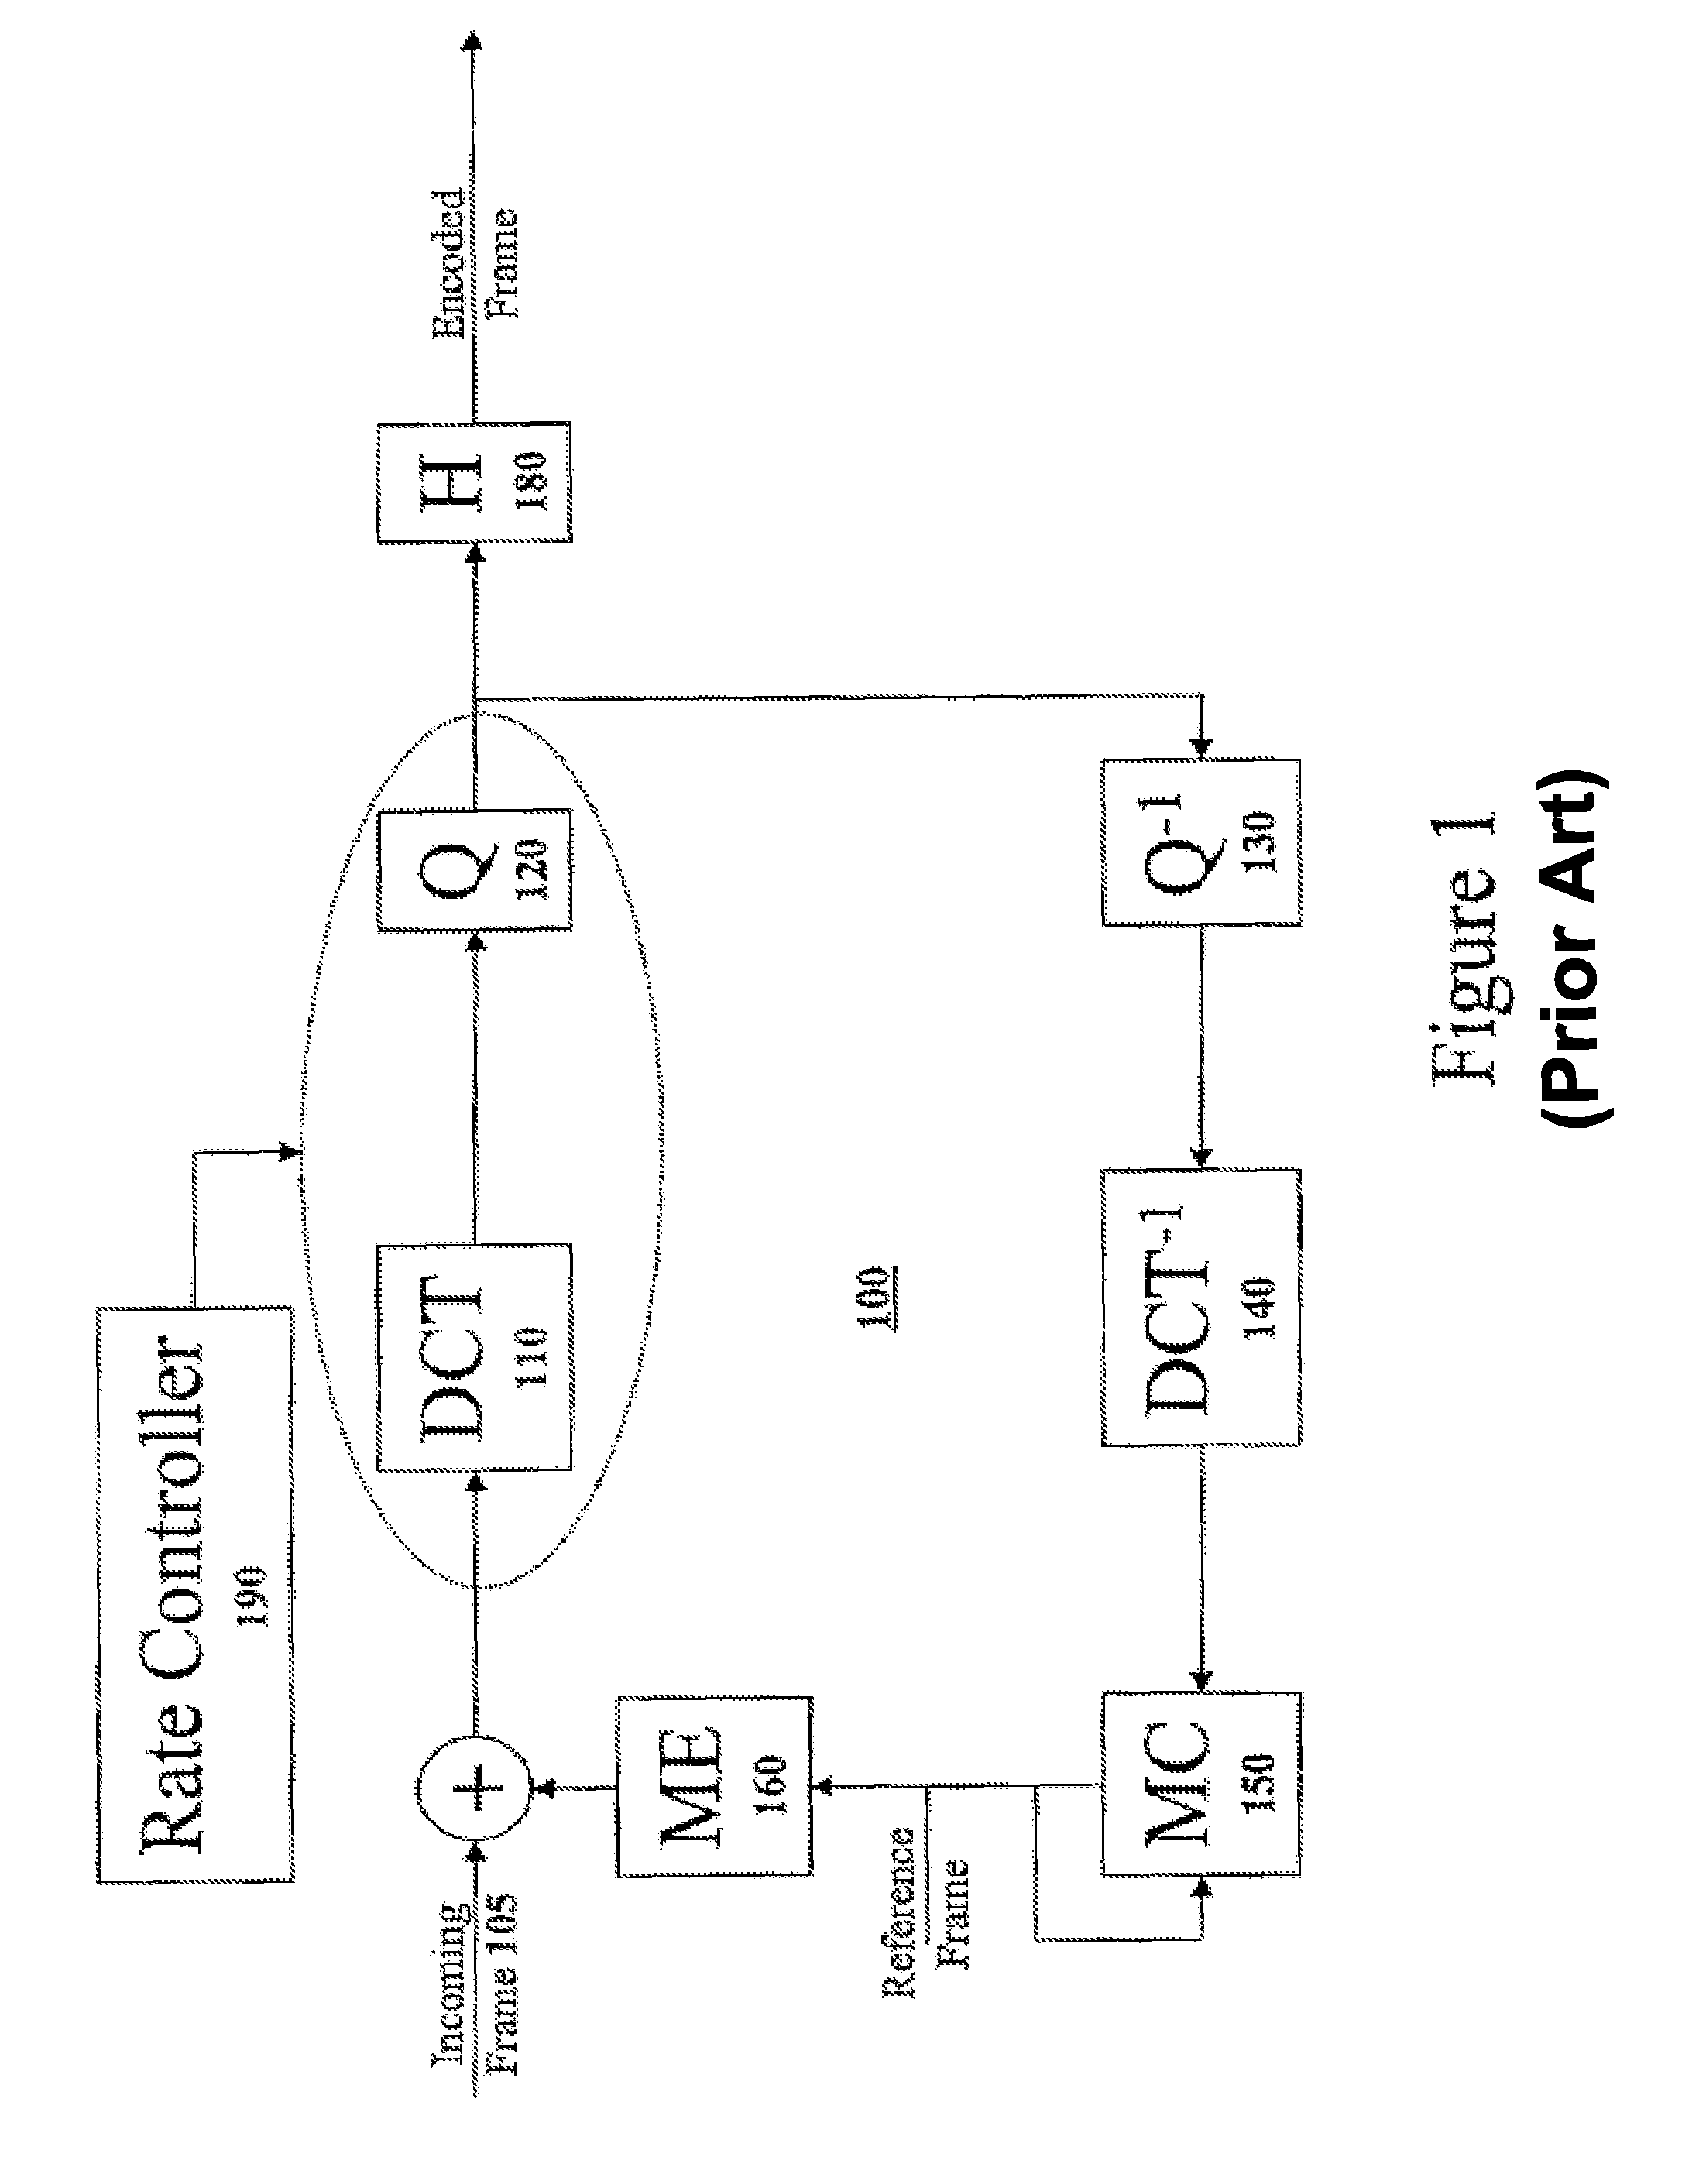 Method and apparatus for variable accuracy inter-picture timing specification for digital video encoding with reduced requirements for division operations